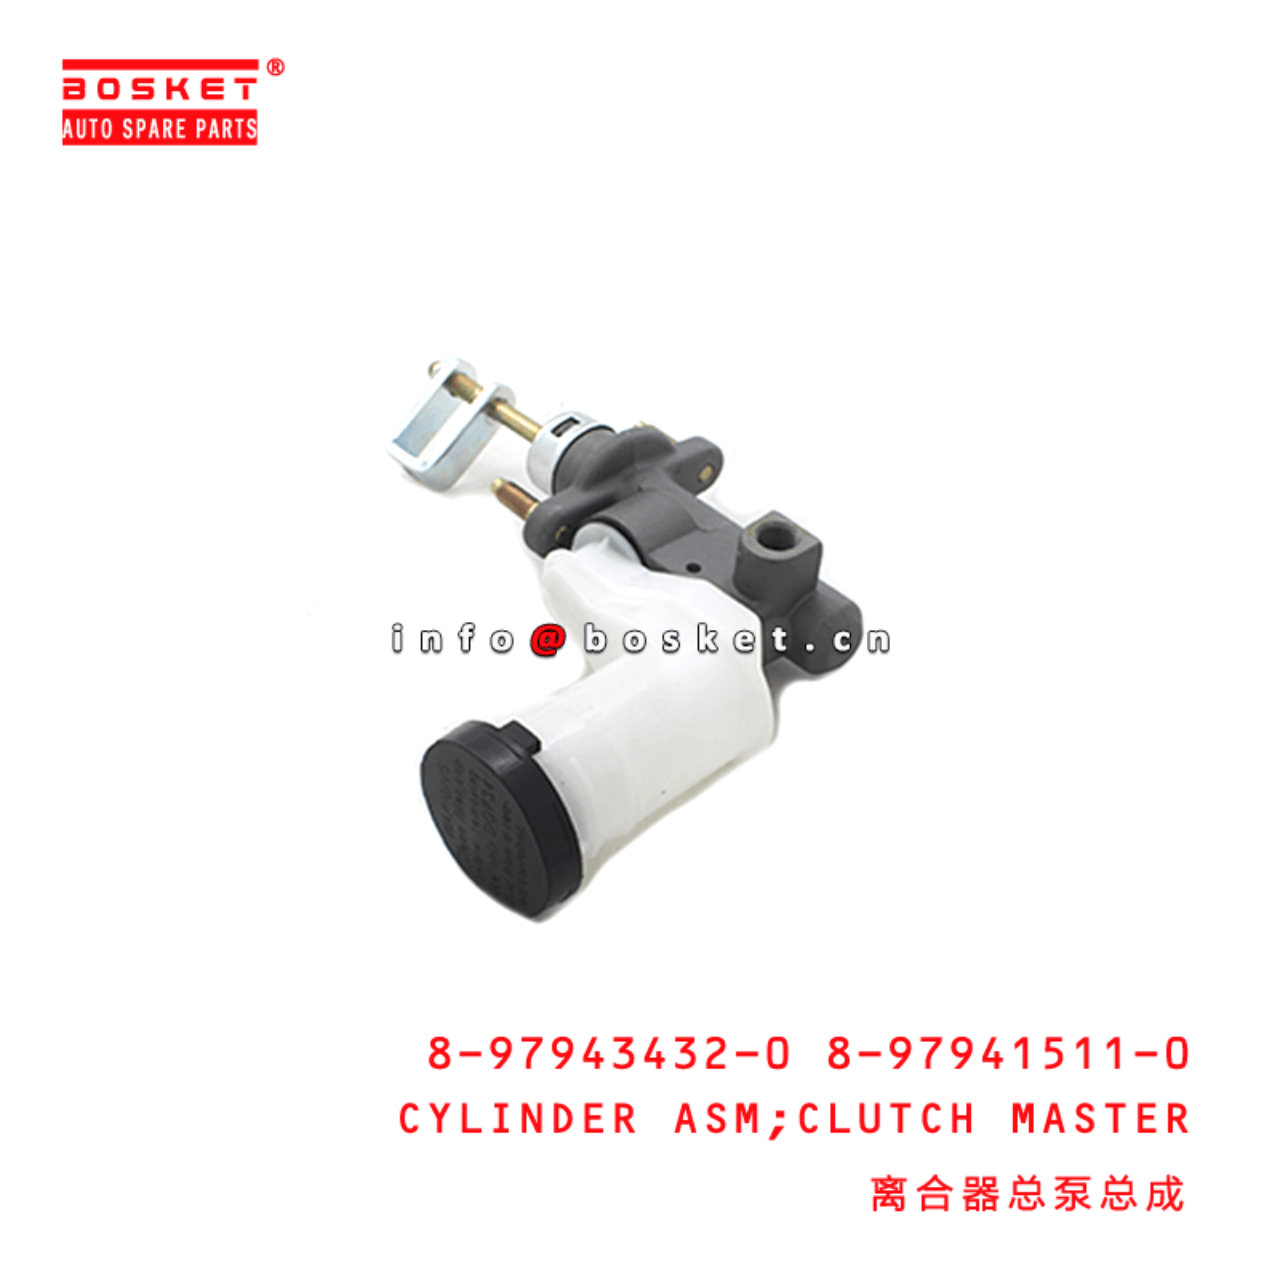 8-97943432-0 8-97941511-0 Clutch Master Cylinder Assembly 8979434320 8979415110 Suitable for ISUZU D